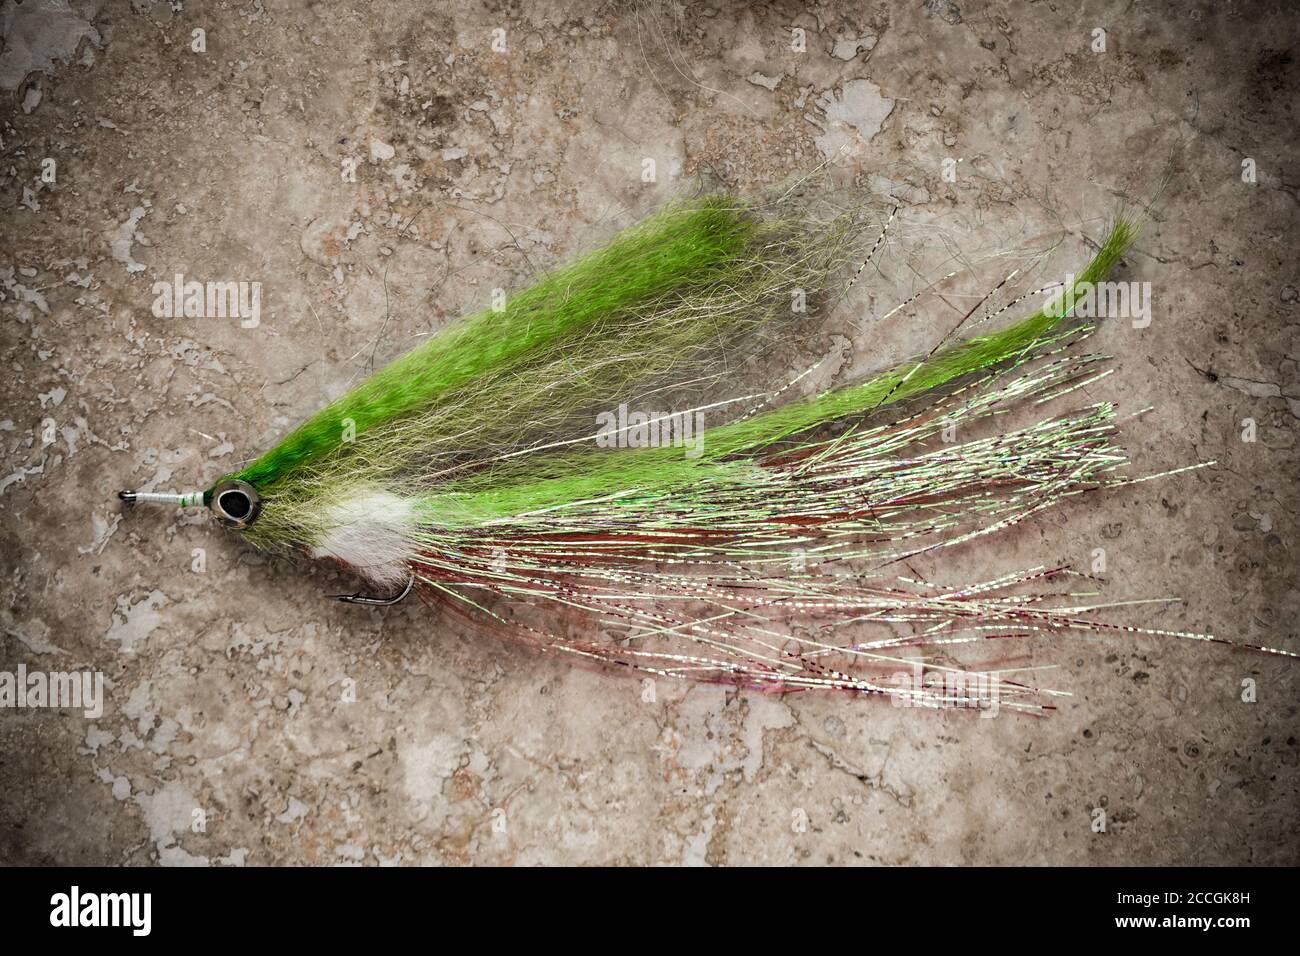 A homemade fishing fly designed for catching pike, Esox lucius. Desaturated colours on a light stone background. Dorset England UK GB Stock Photo